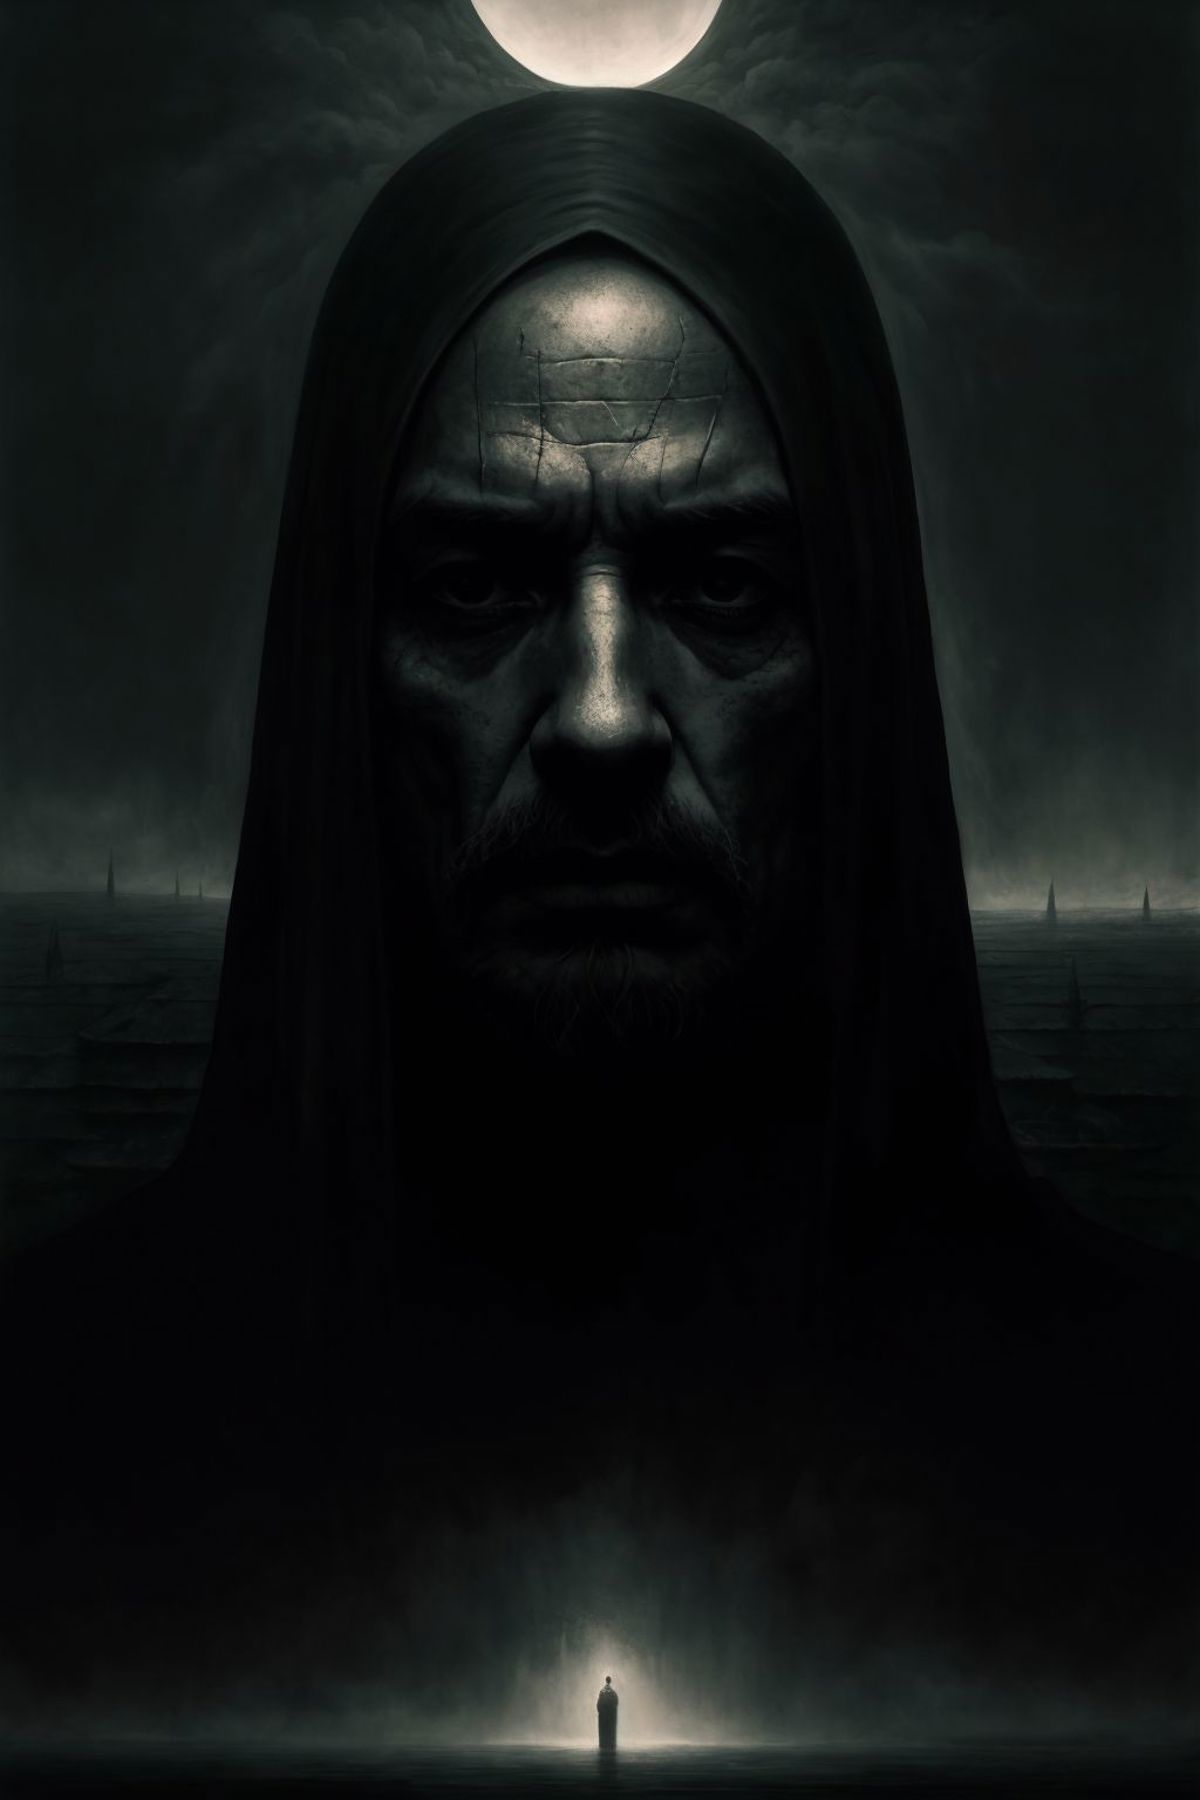 A dark and mysterious image of a bearded man with a long black robe looking straight ahead.